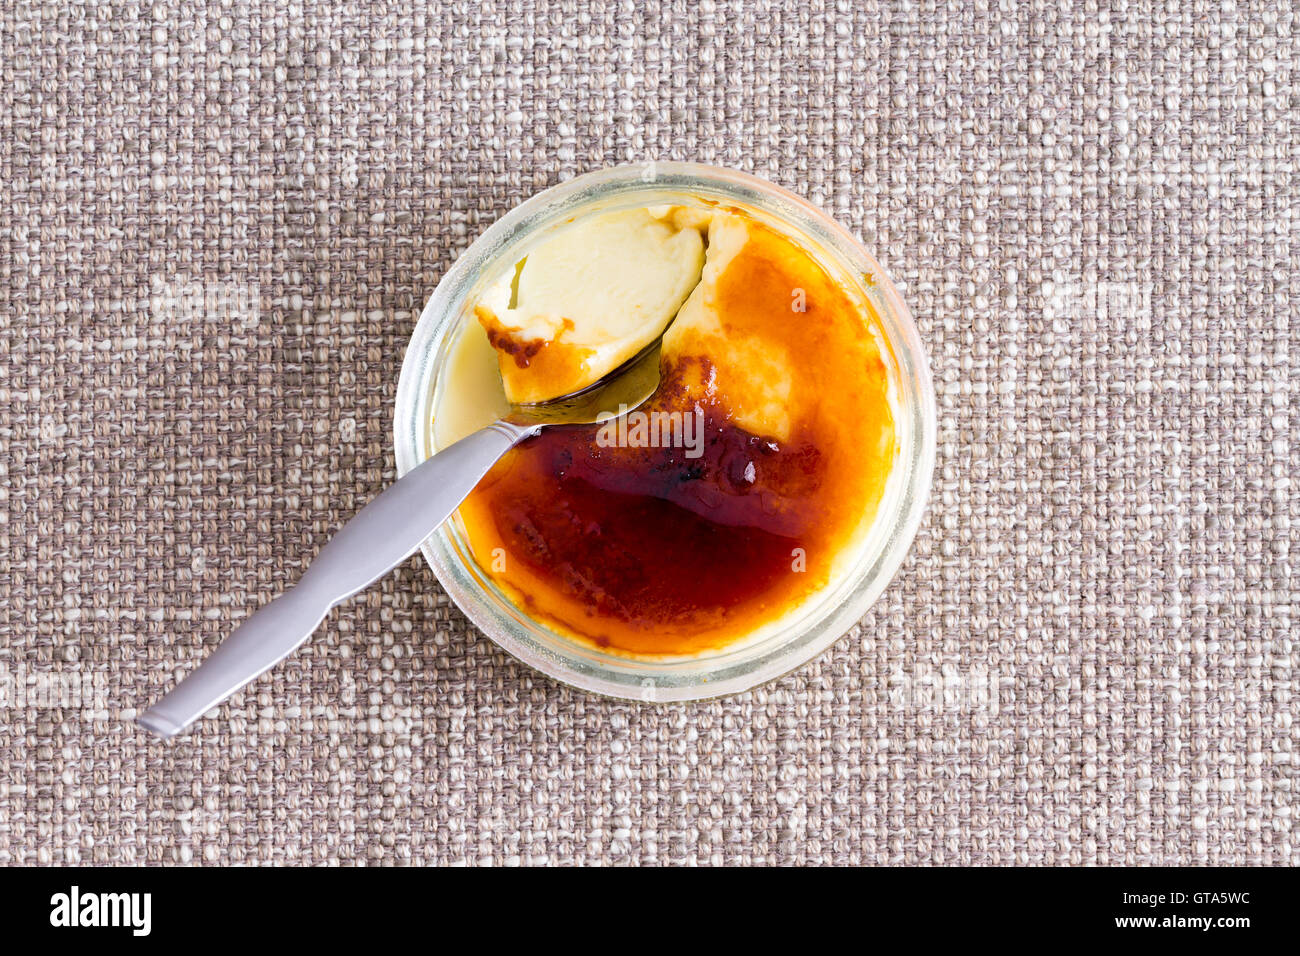 Partially eaten browned creme brulee with silver spoon against a textured background Stock Photo